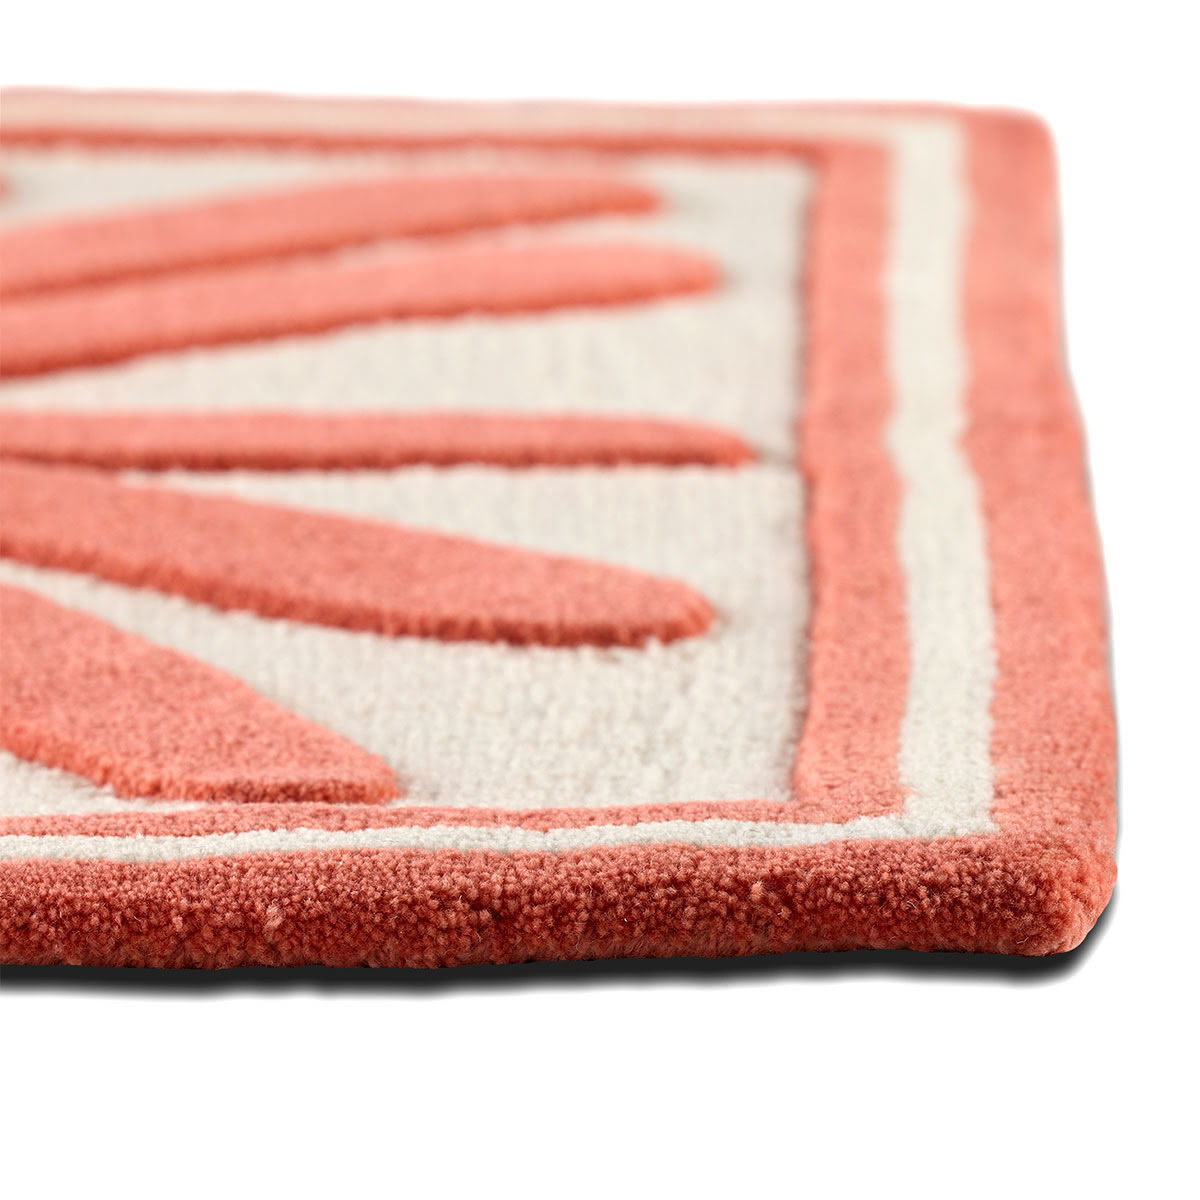 The corner of an abstract coral colored rug.